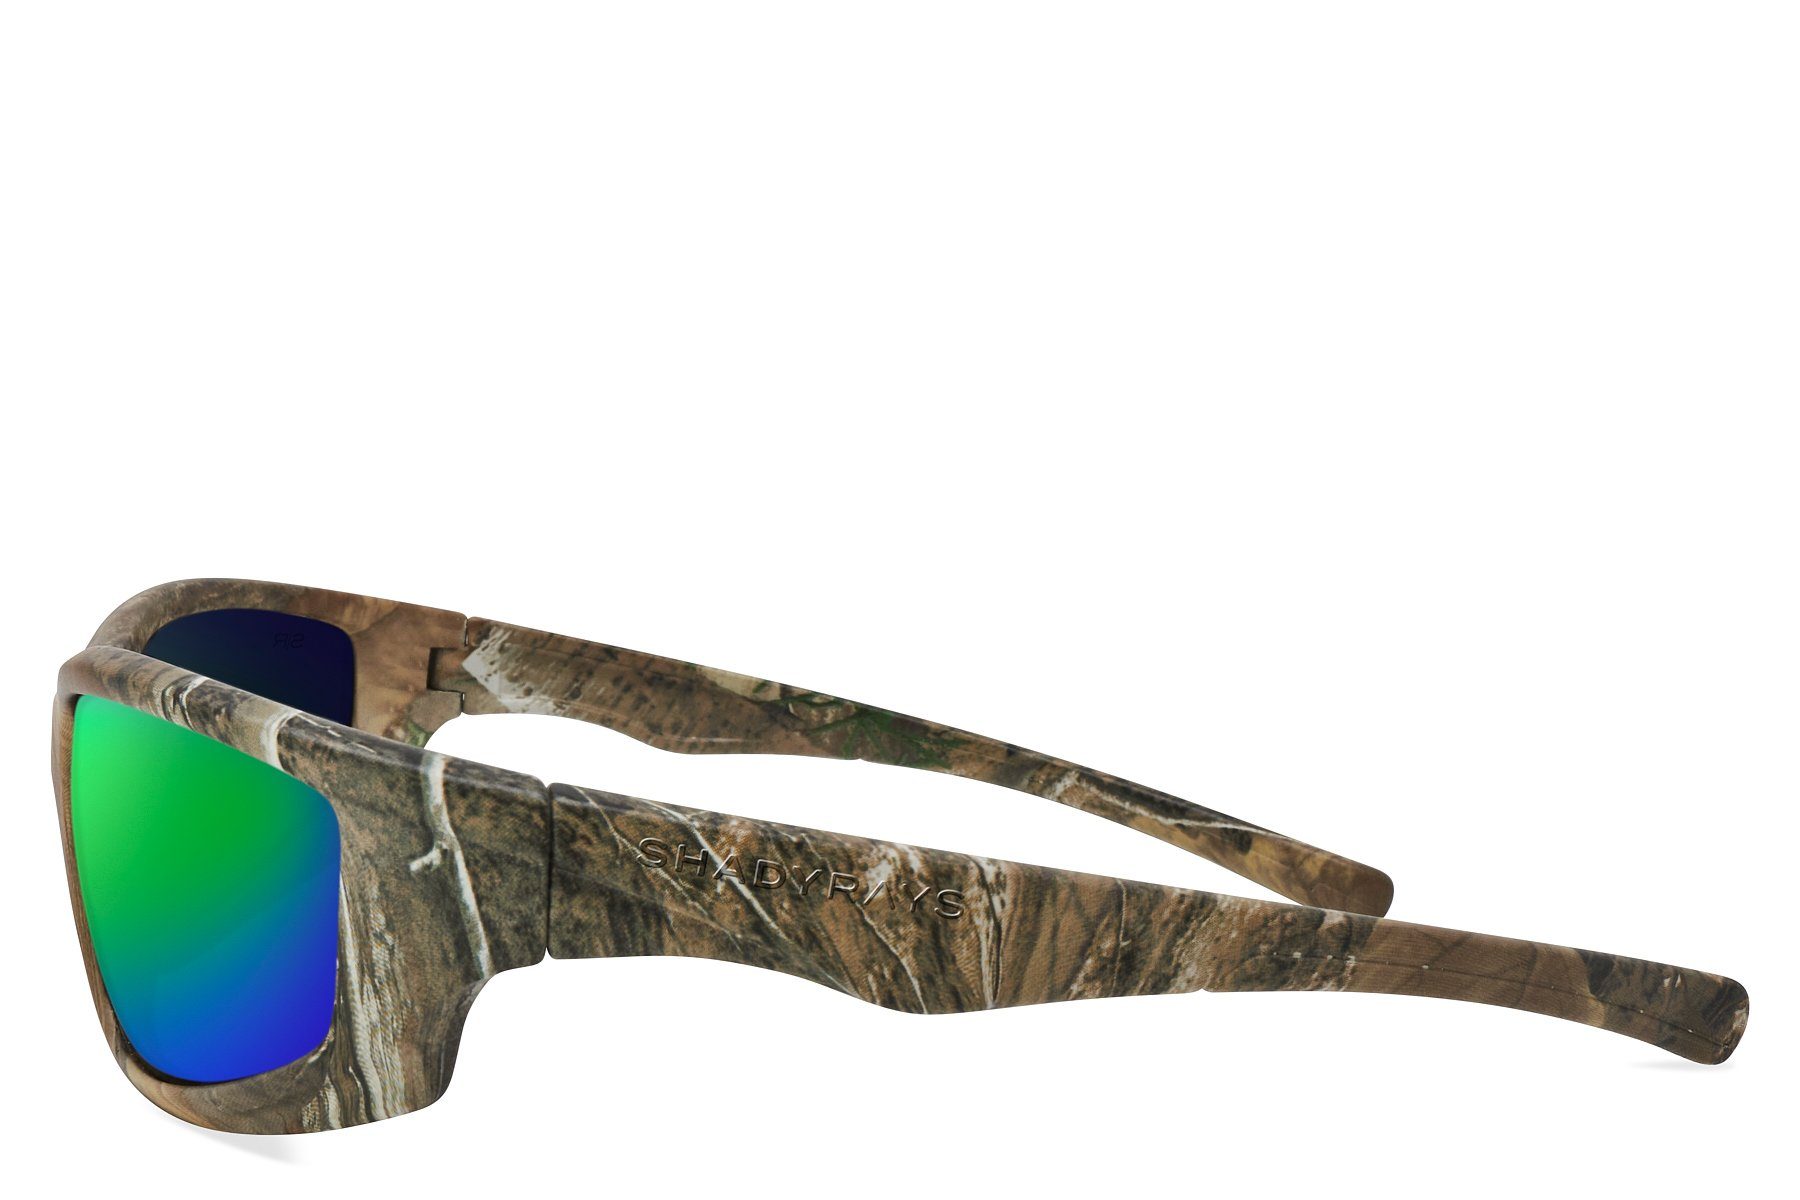 x Series - Realtree Edge : Emerald Polarized Sunglasses | Camouflage Green Sport Sunglasses | Cycling Glasses | Best Christmas Gifts | Gifts for The